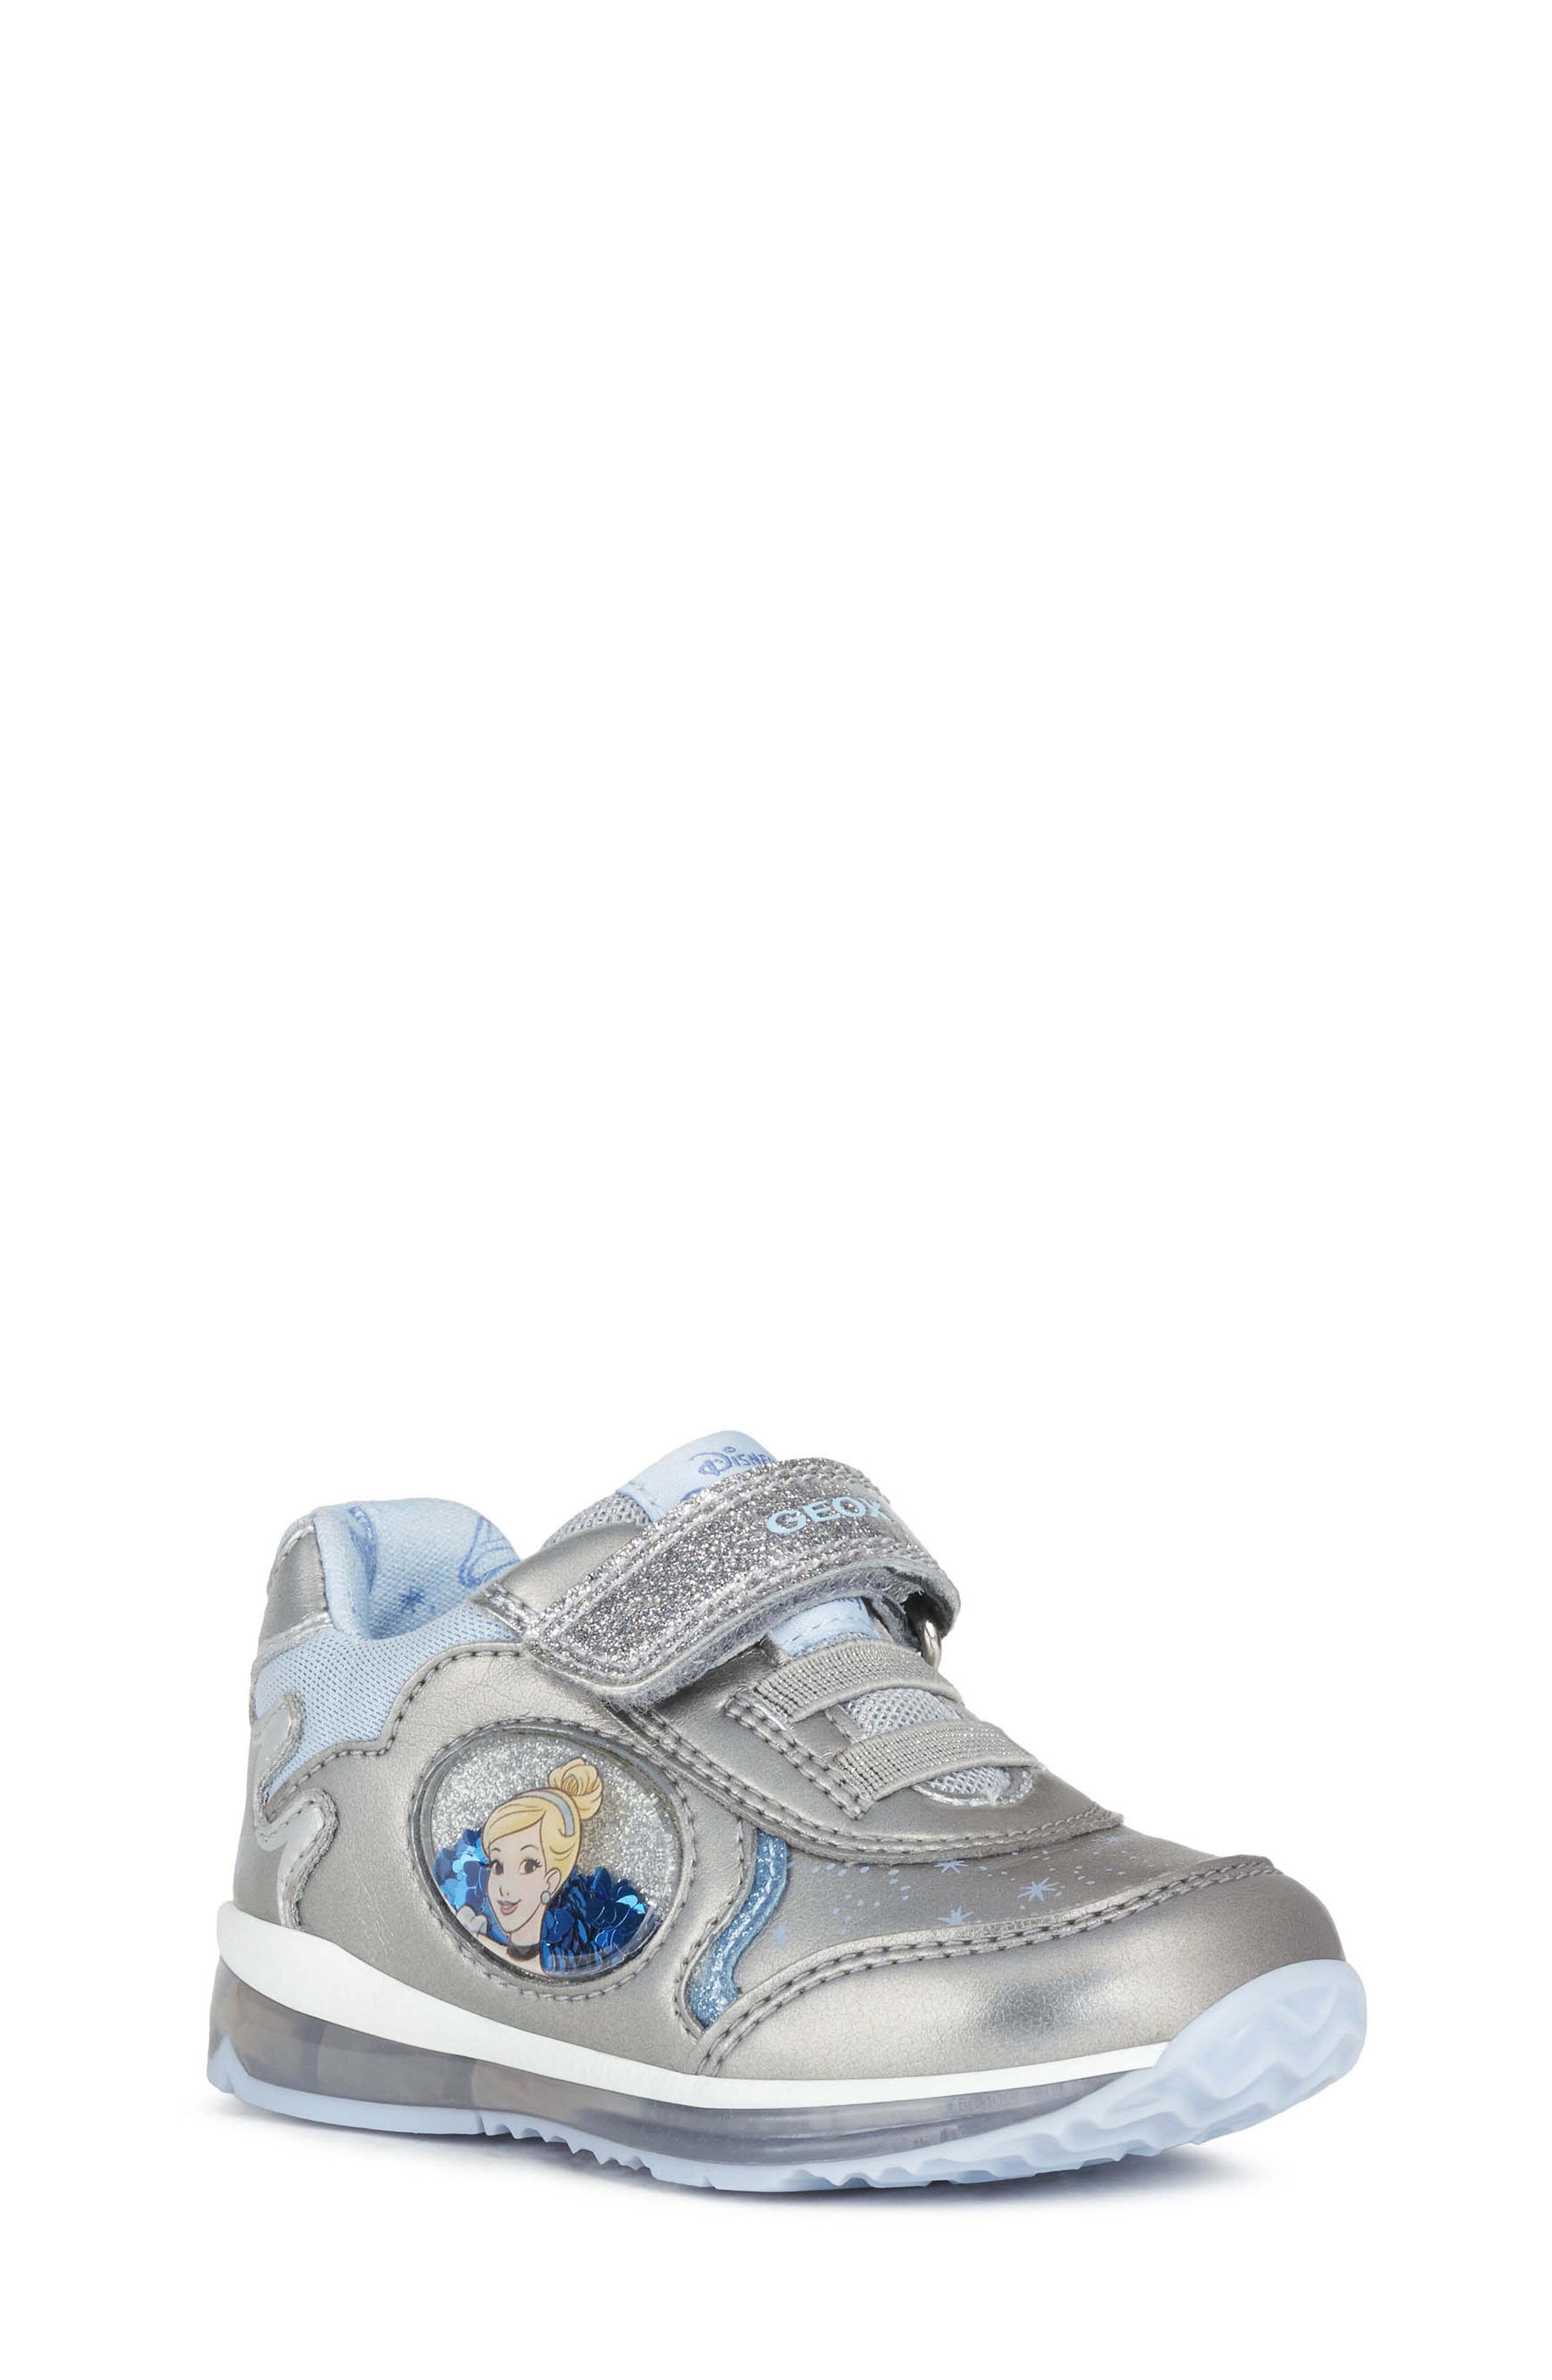 geox childrens shoes